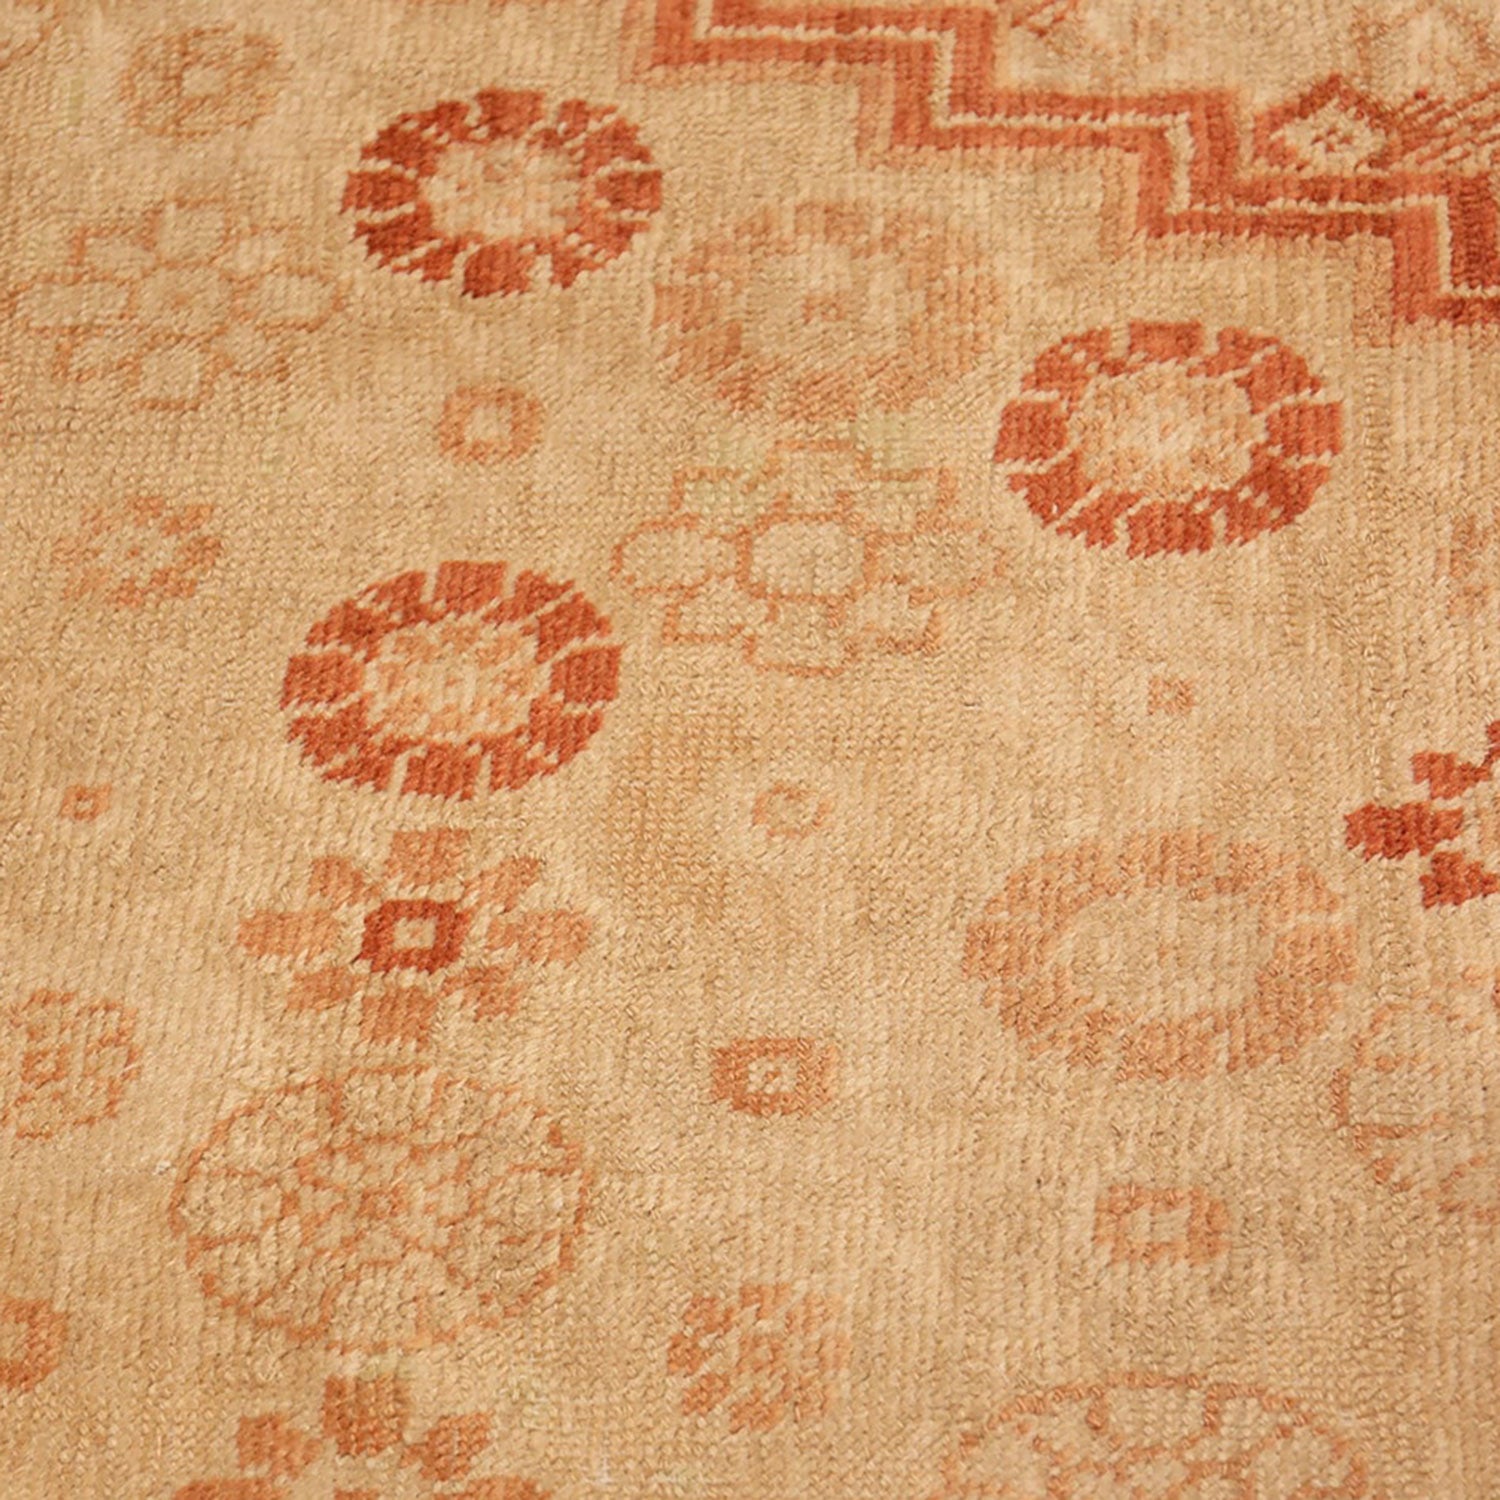 Close-up of a hand-woven rug with a symmetrical floral pattern.